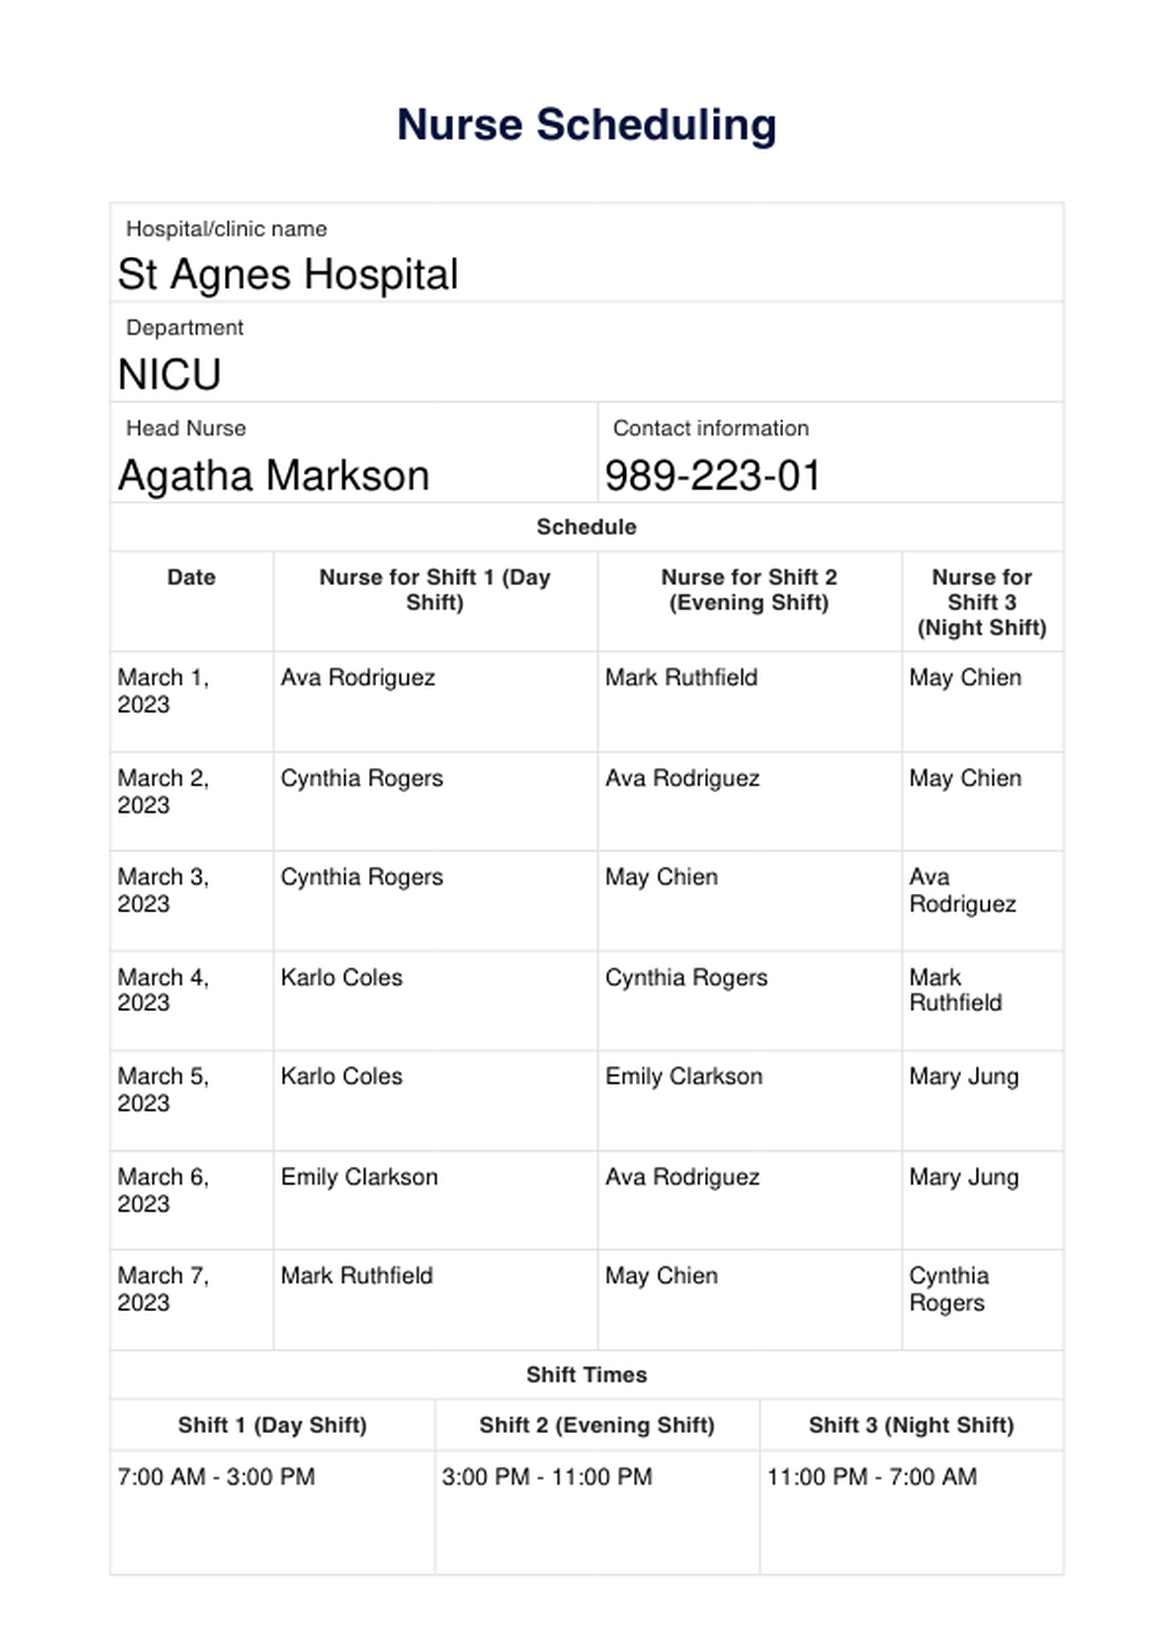 Nurse Scheduling Template PDF Example